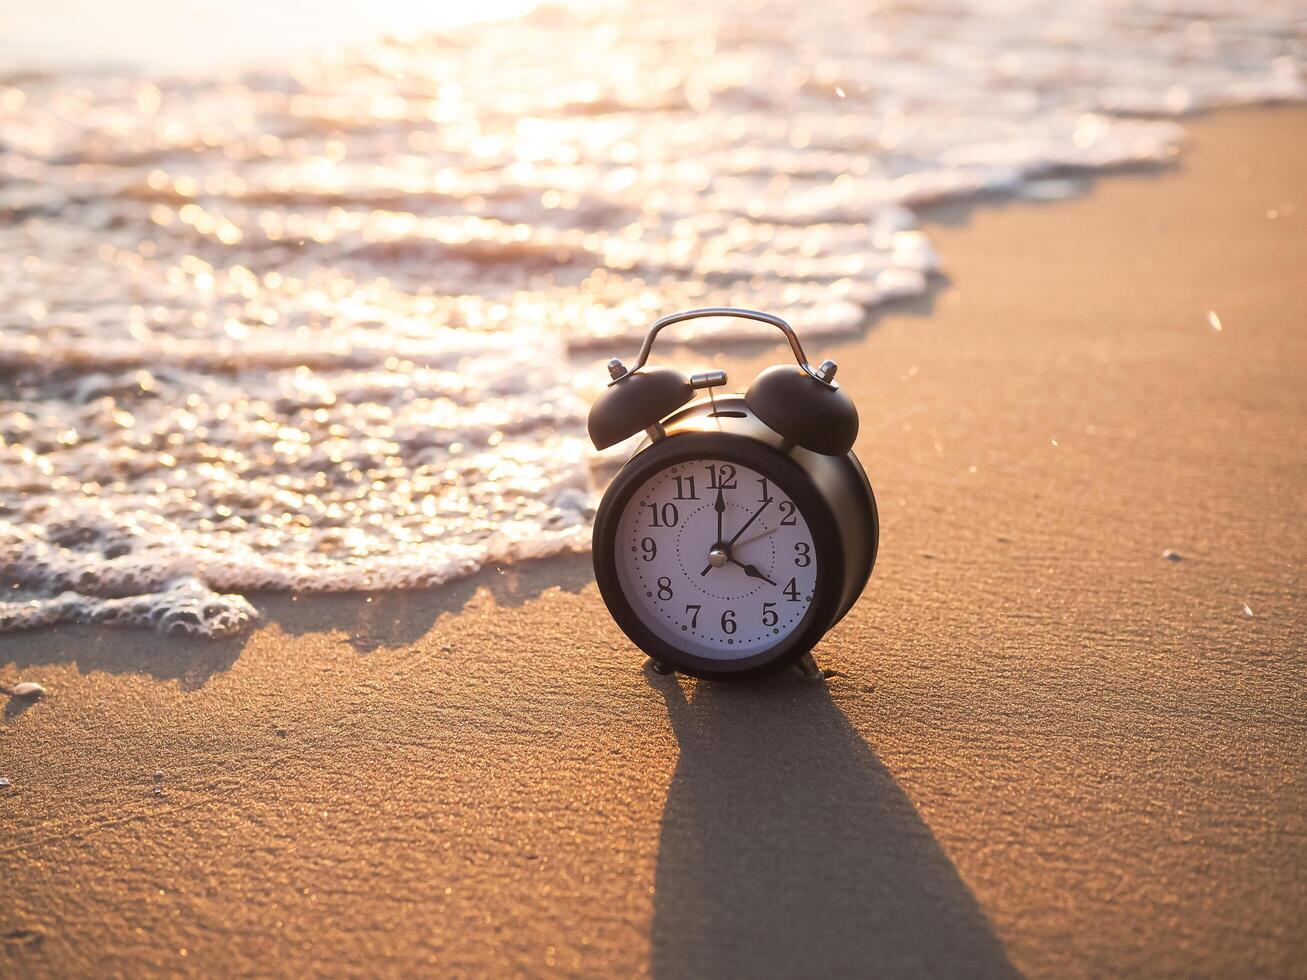 Black alarm clock on the beach in the sunset time. The concept about Time to summer, Travel, Vacation and Relaxation photo